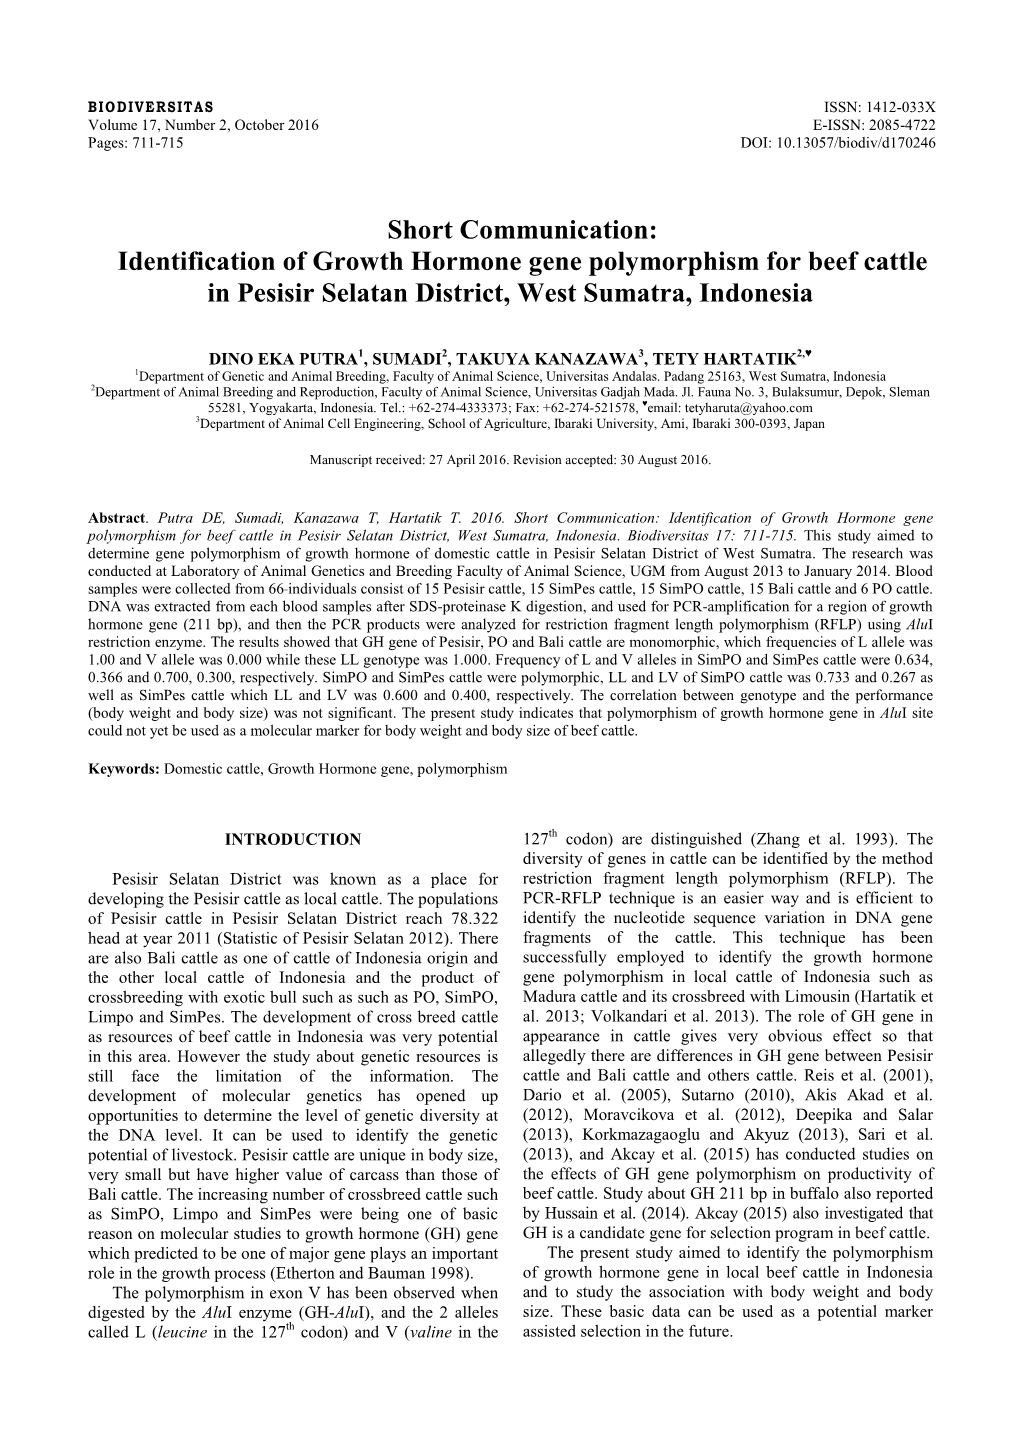 Identification of Growth Hormone Gene Polymorphism for Beef Cattle in Pesisir Selatan District, West Sumatra, Indonesia